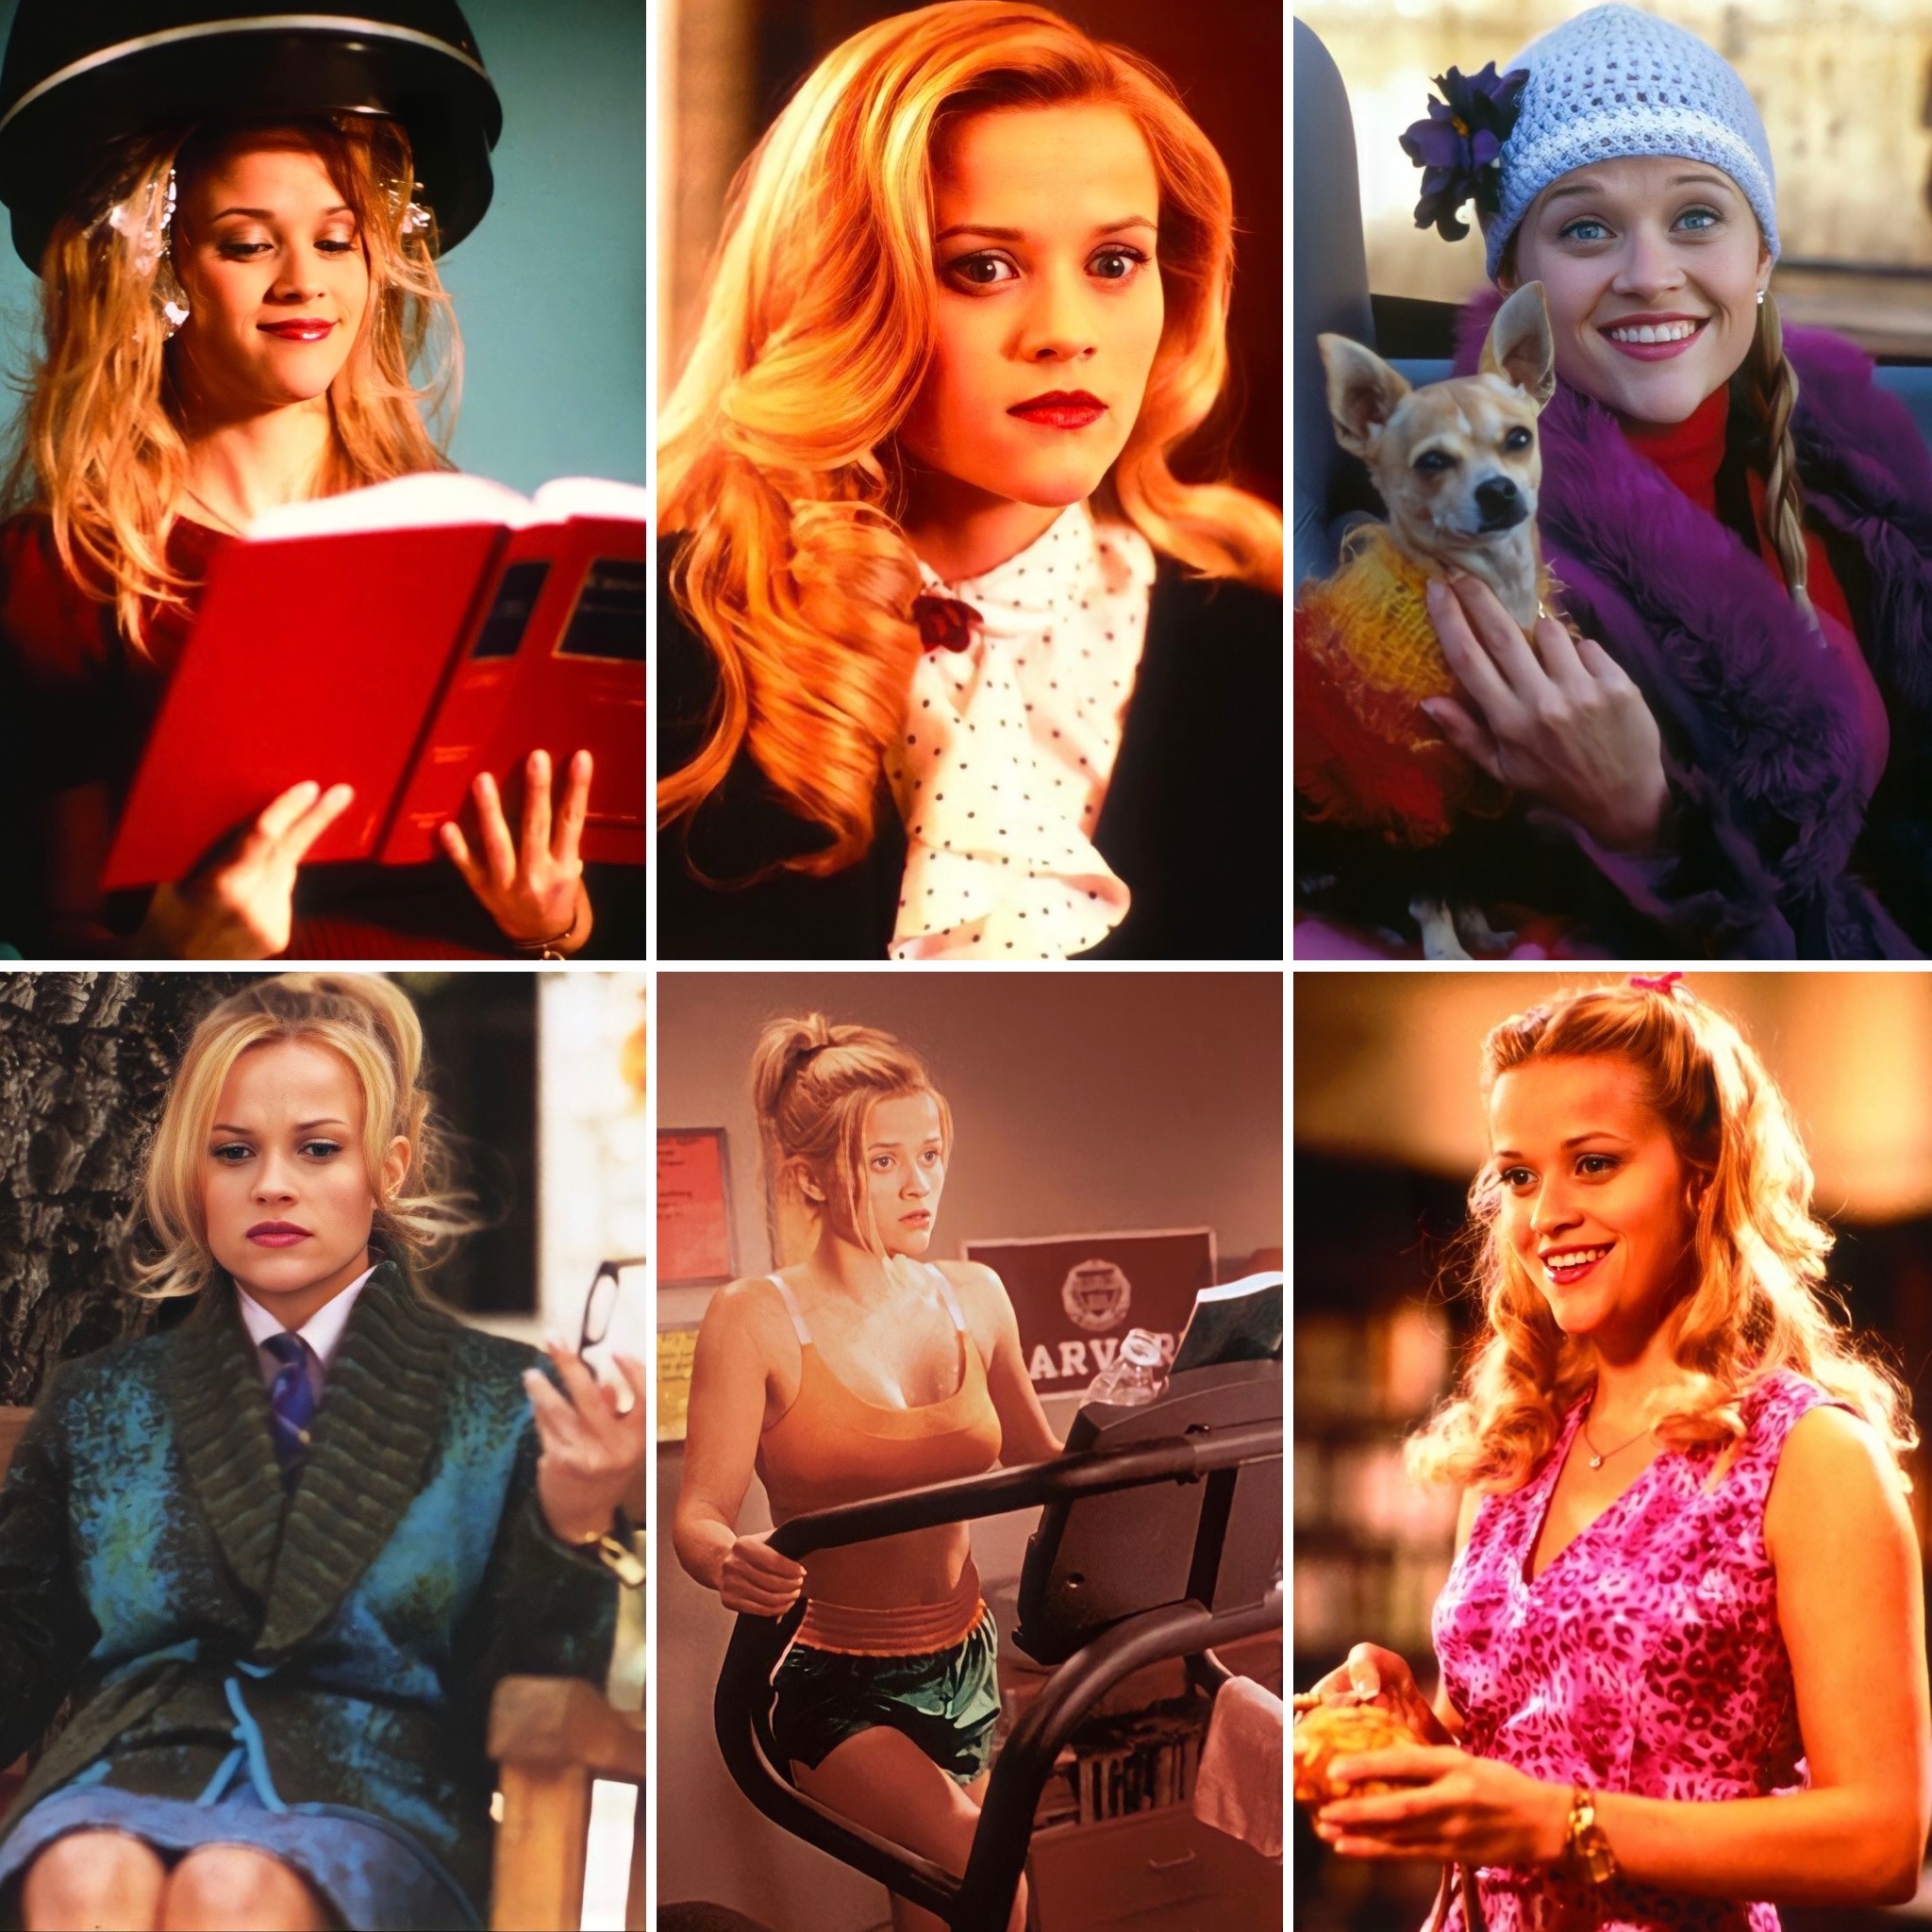 Reese Witherspoon in “Legally Blonde”